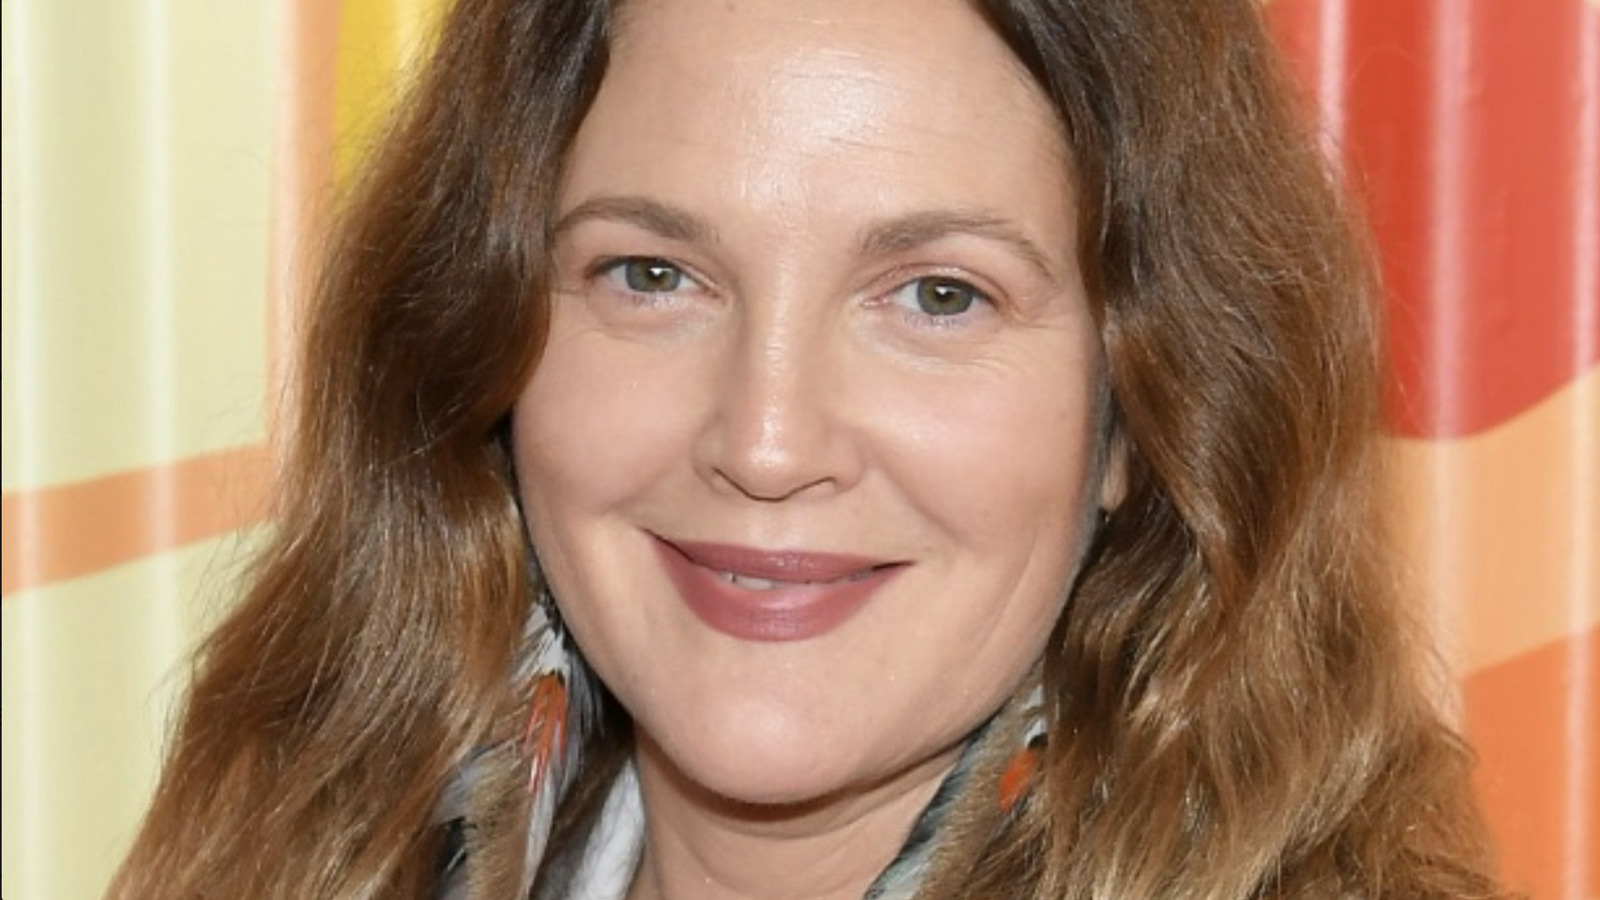 Drew Barrymore's Walmart Dutch Oven Comes in a New Fall Color